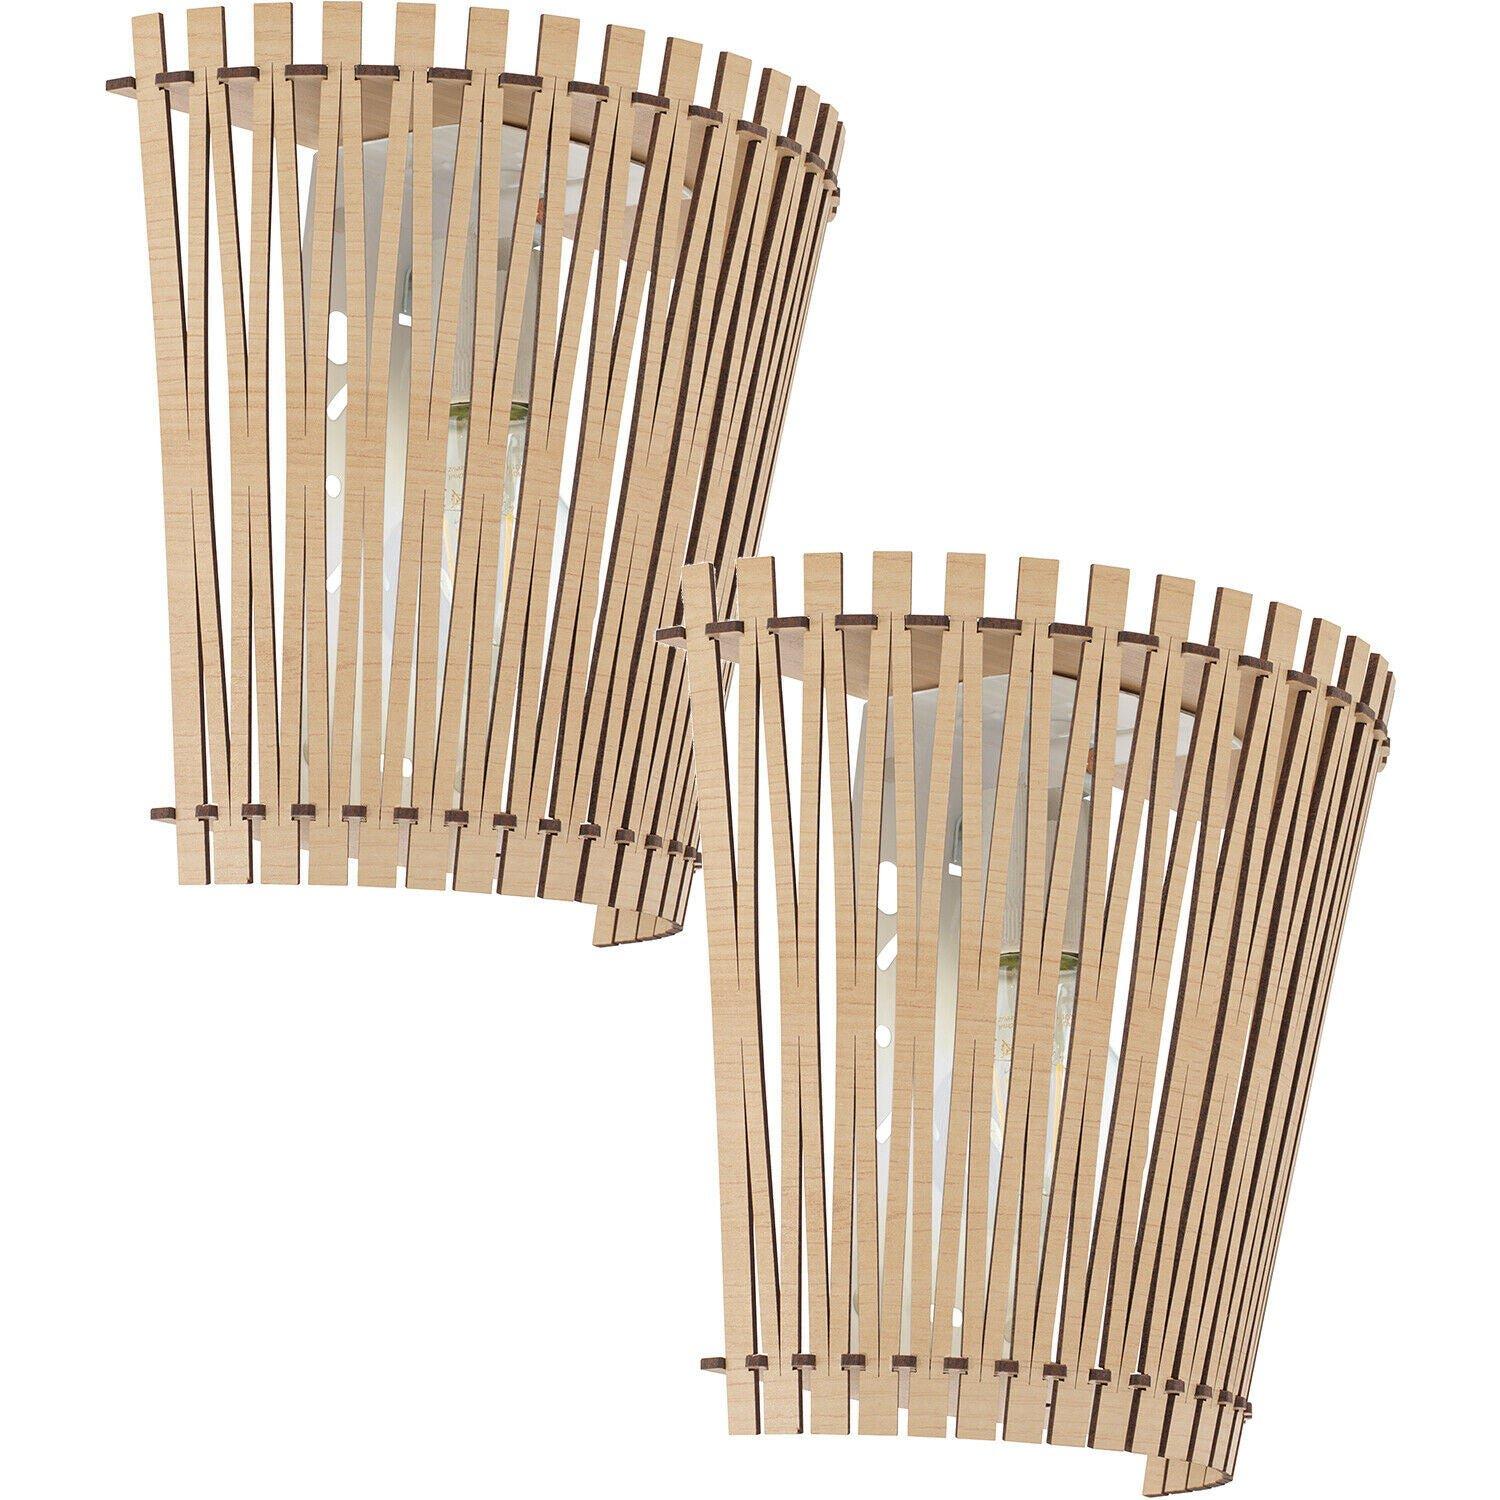 2 PACK Wall Light Colour White Shade Maple Wood Fencing Surround Bulb E27 1x60W